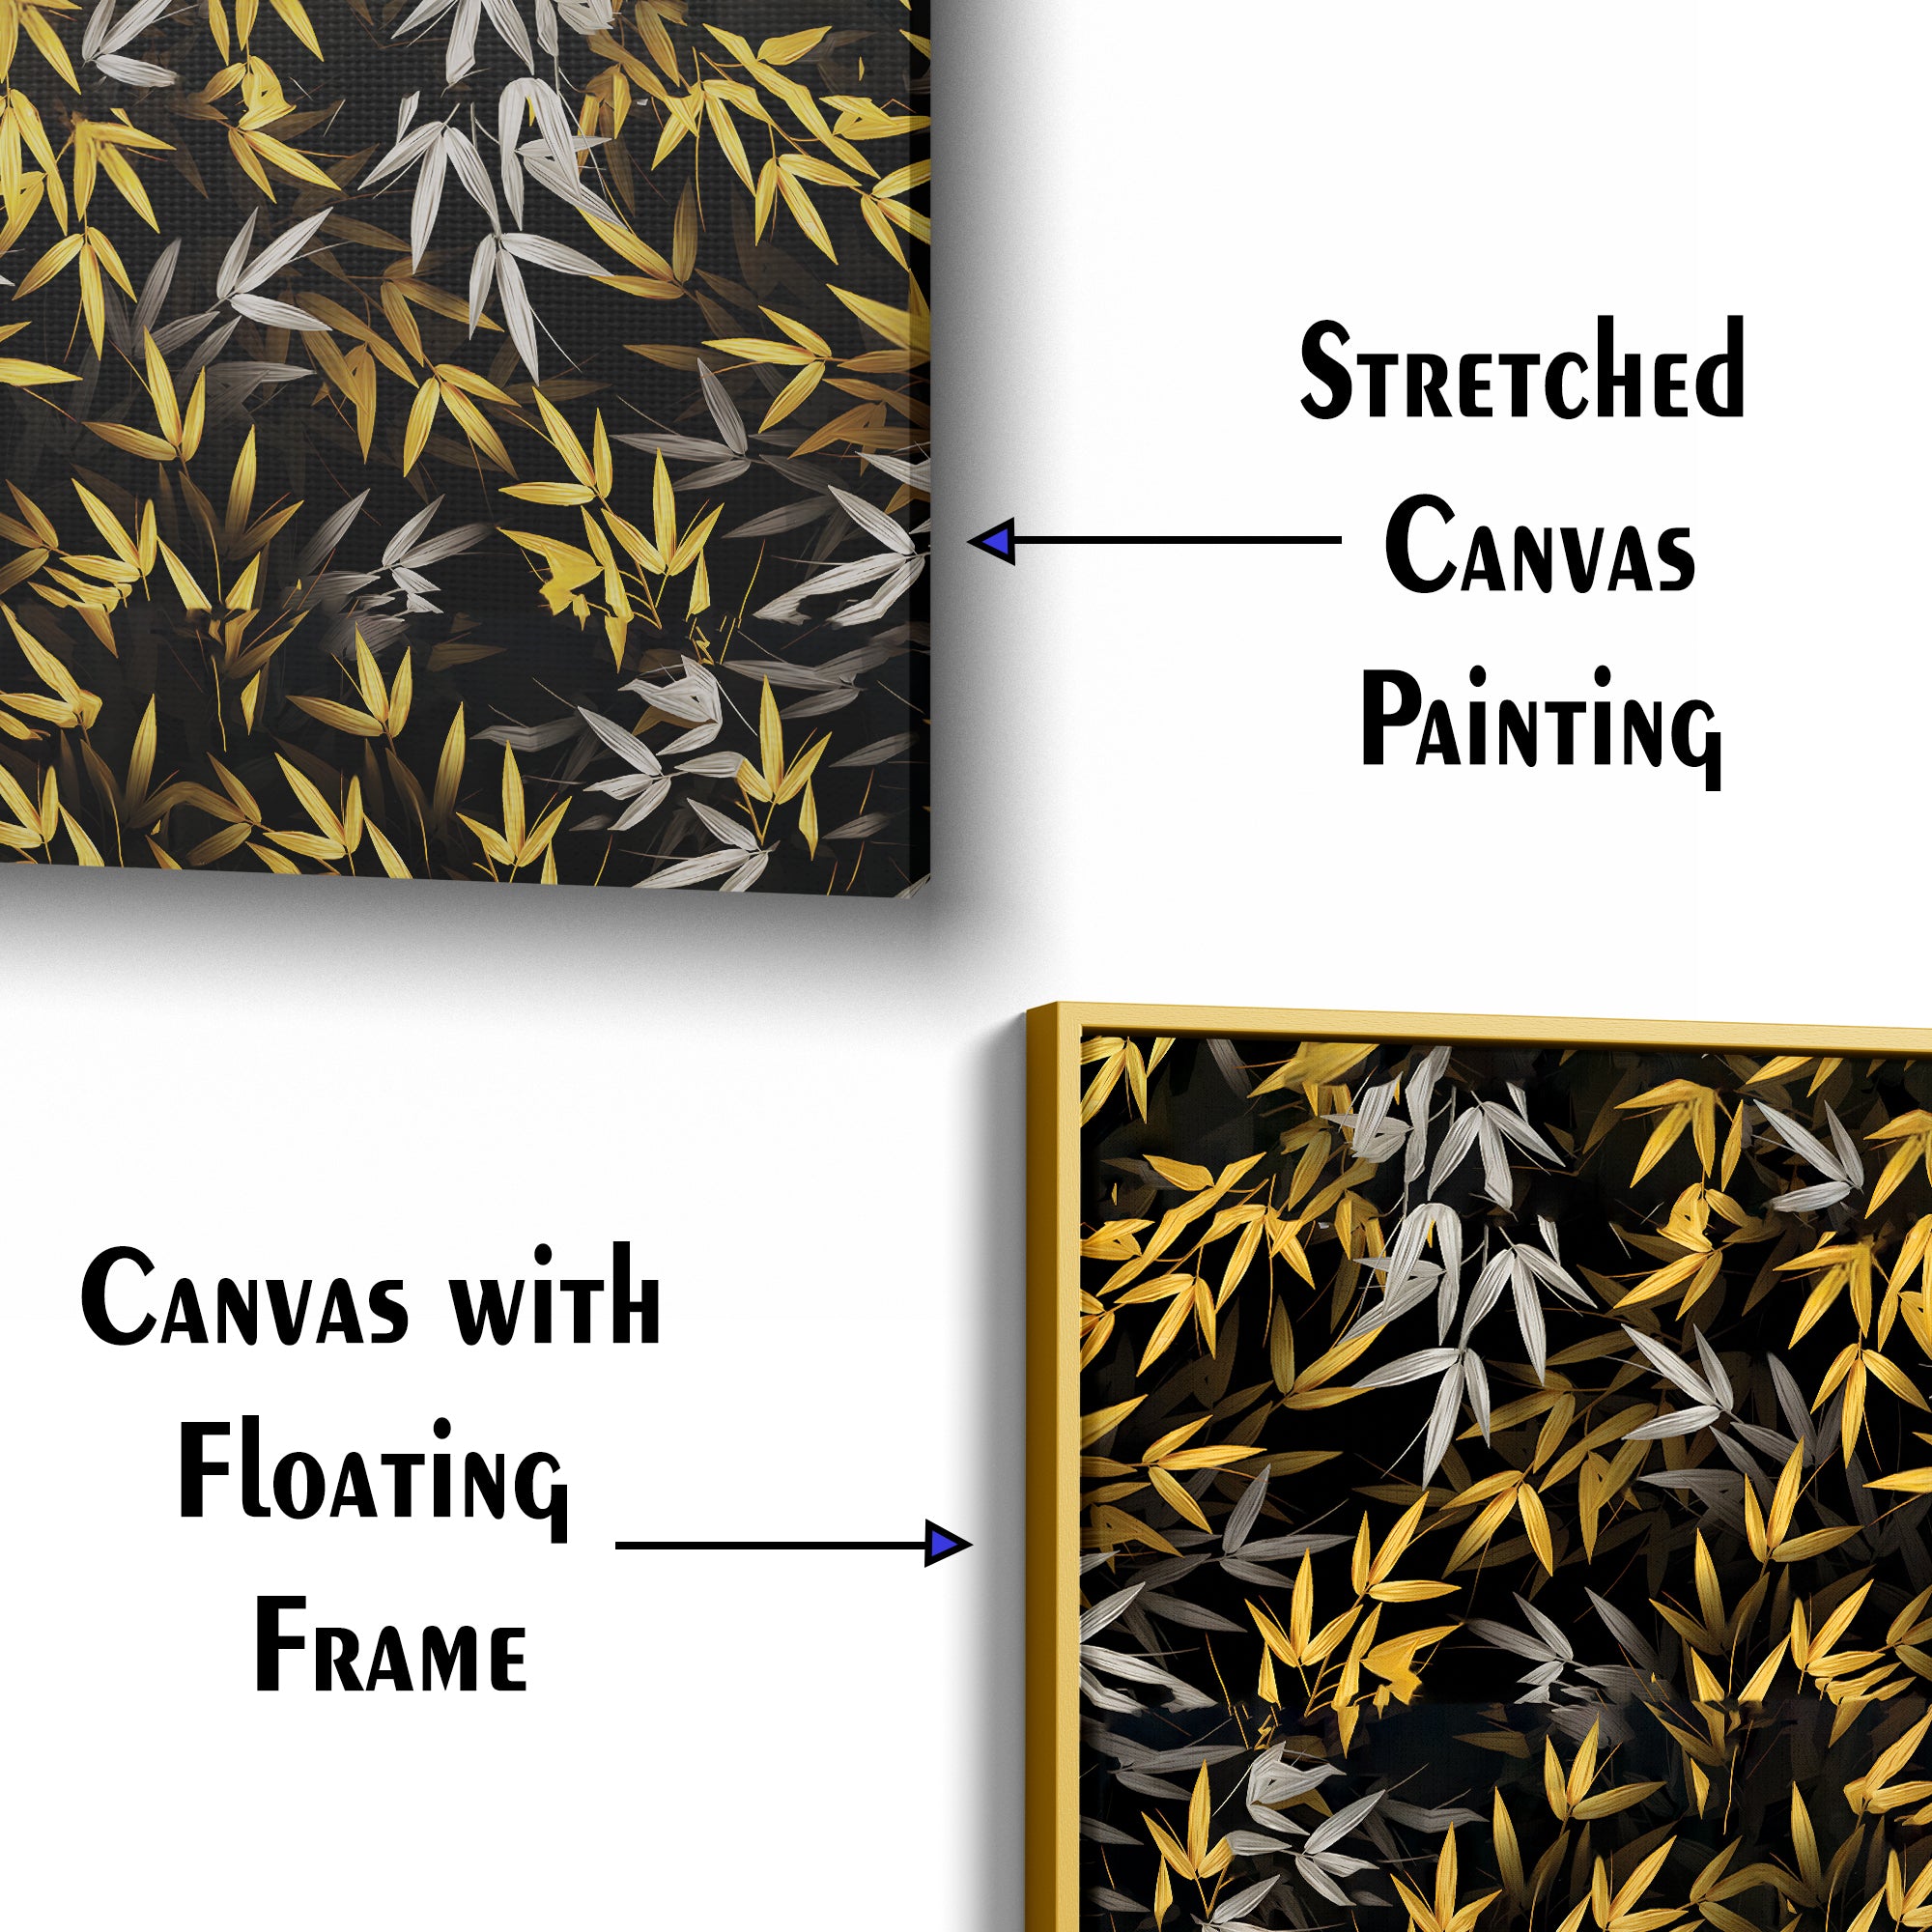 Golden Bamboo Leaves Morden Art Canvas Wall Painting